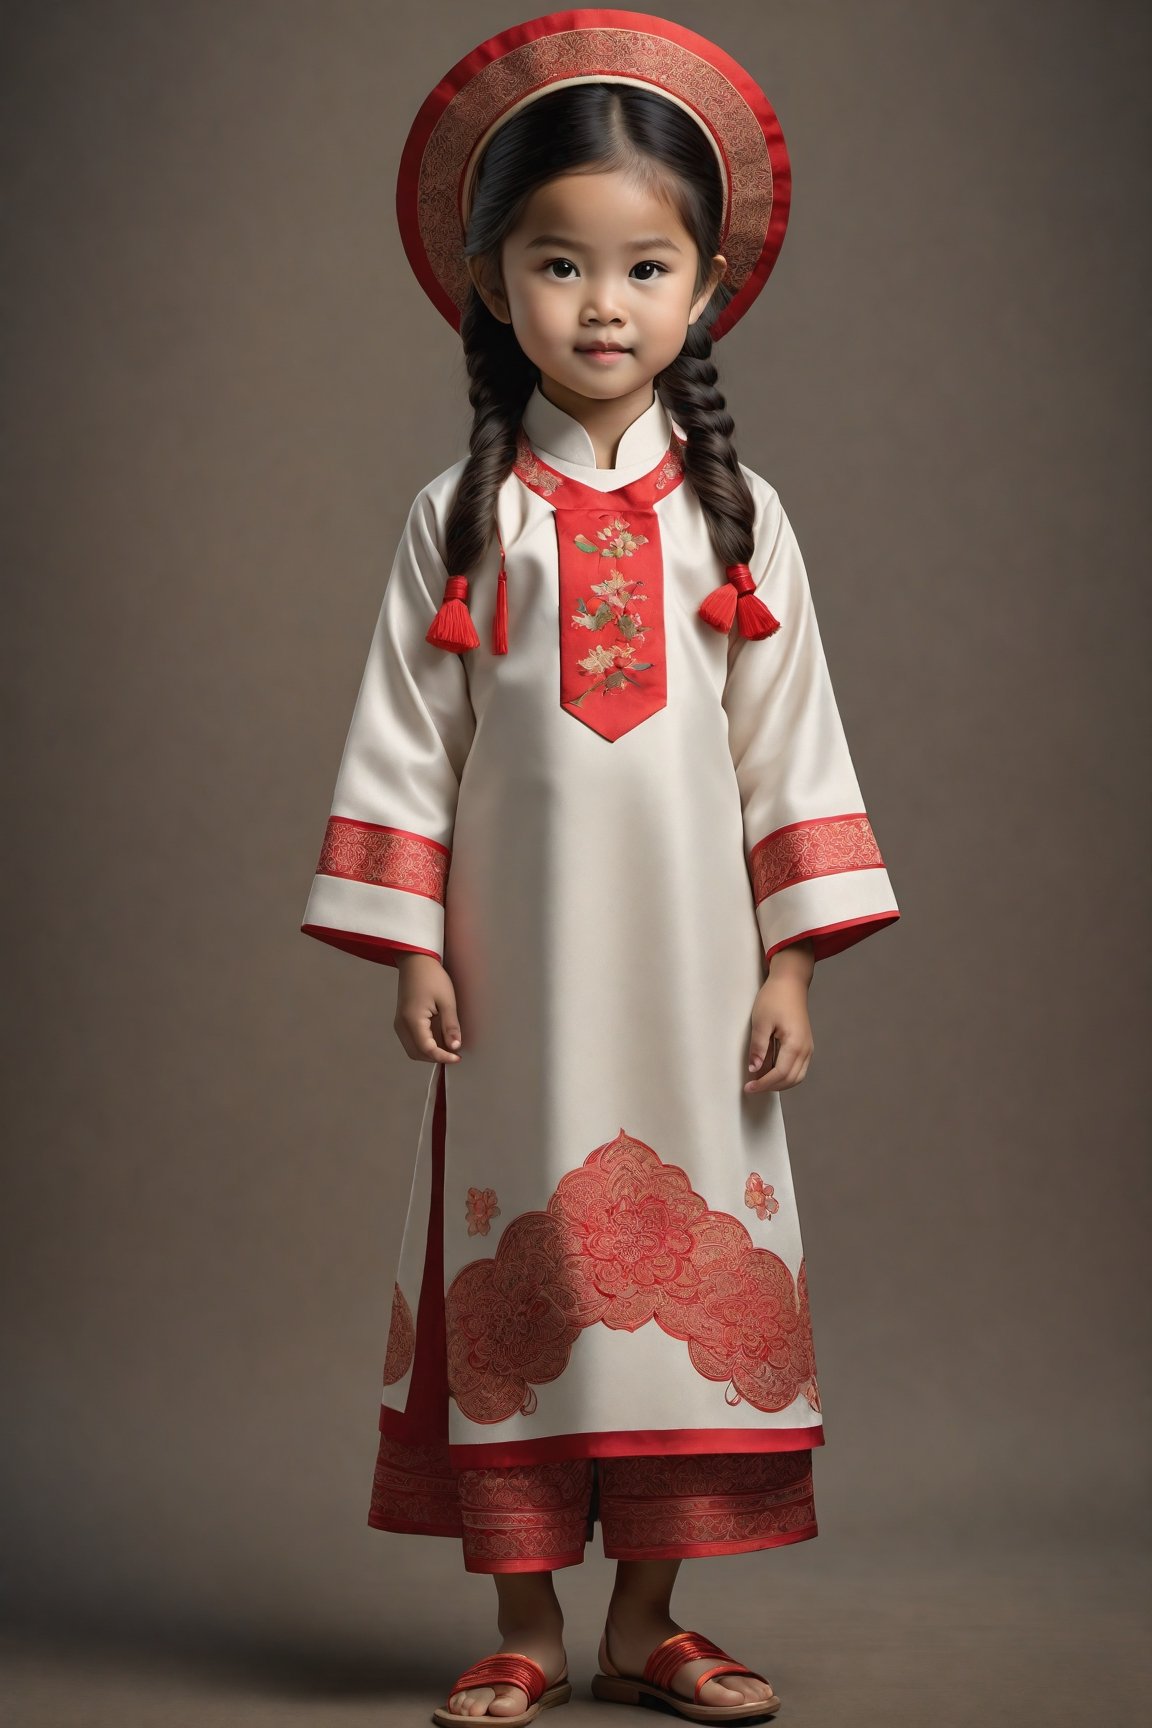 ((full body)) body_marking, highly detailed shot tribal version character of cute Vietnamese girl kid in aodai, masterpiece artwork, white accent, detailed face features, subtle gradients, extremely detailed, photorealistic, 8k, centered, perfect symmetrical, studio photography, muted color scheme, made with adobe illustrator, solid dark background 